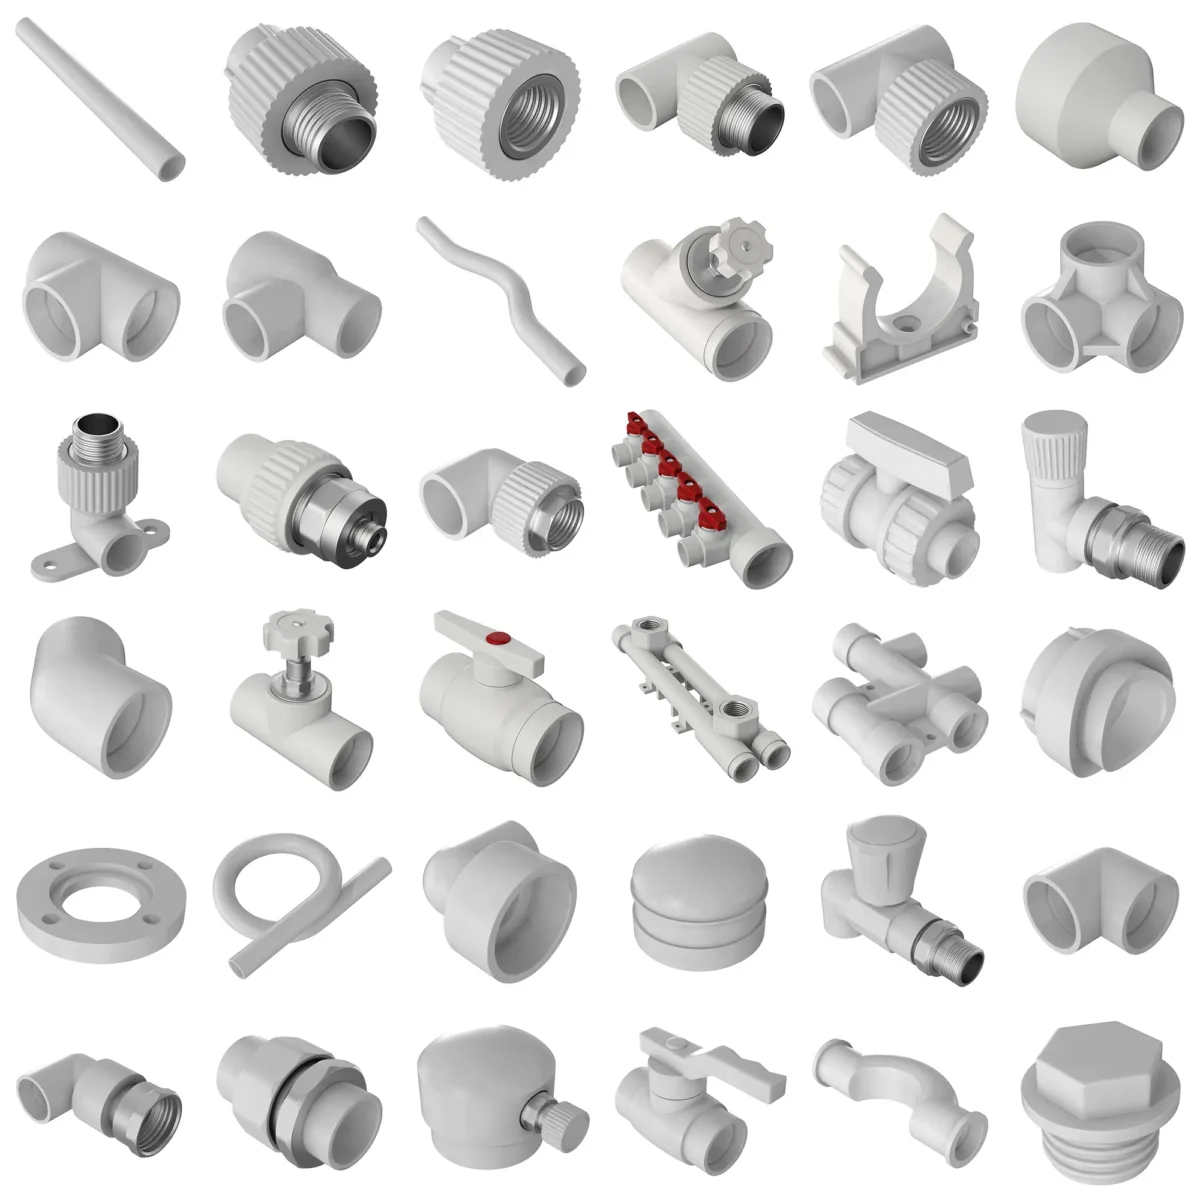 Plastic fittings Big №1 3D model download on cg.market 3ds max V-Ray